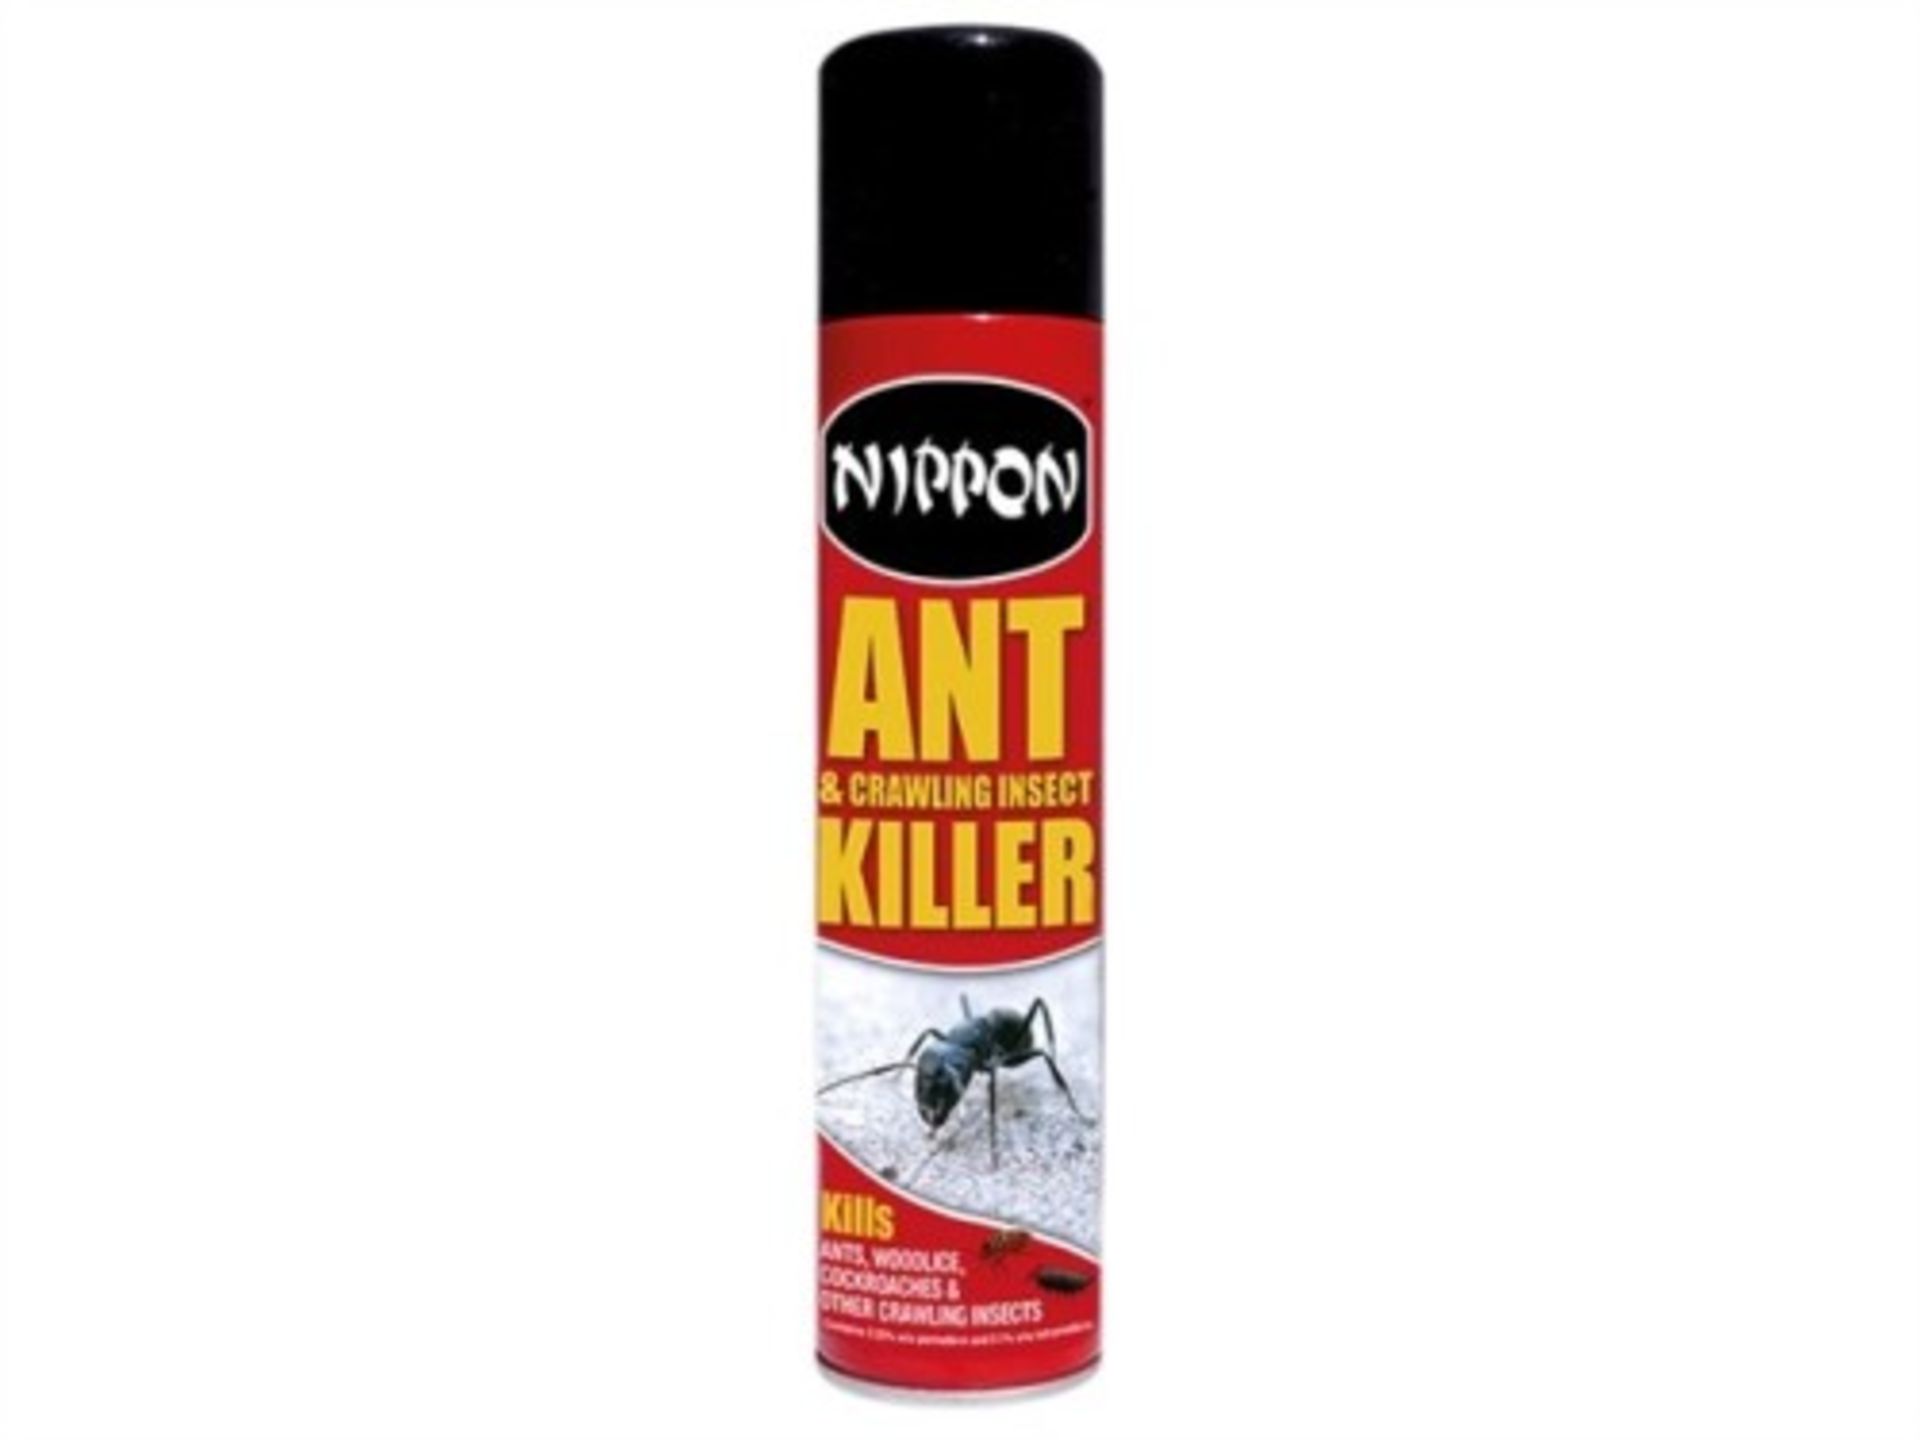 V Brand New Twenty Seven 300ml Cans Nippon Ant & Crawling Insect Killer ISP £3.30 Each (UK Tool